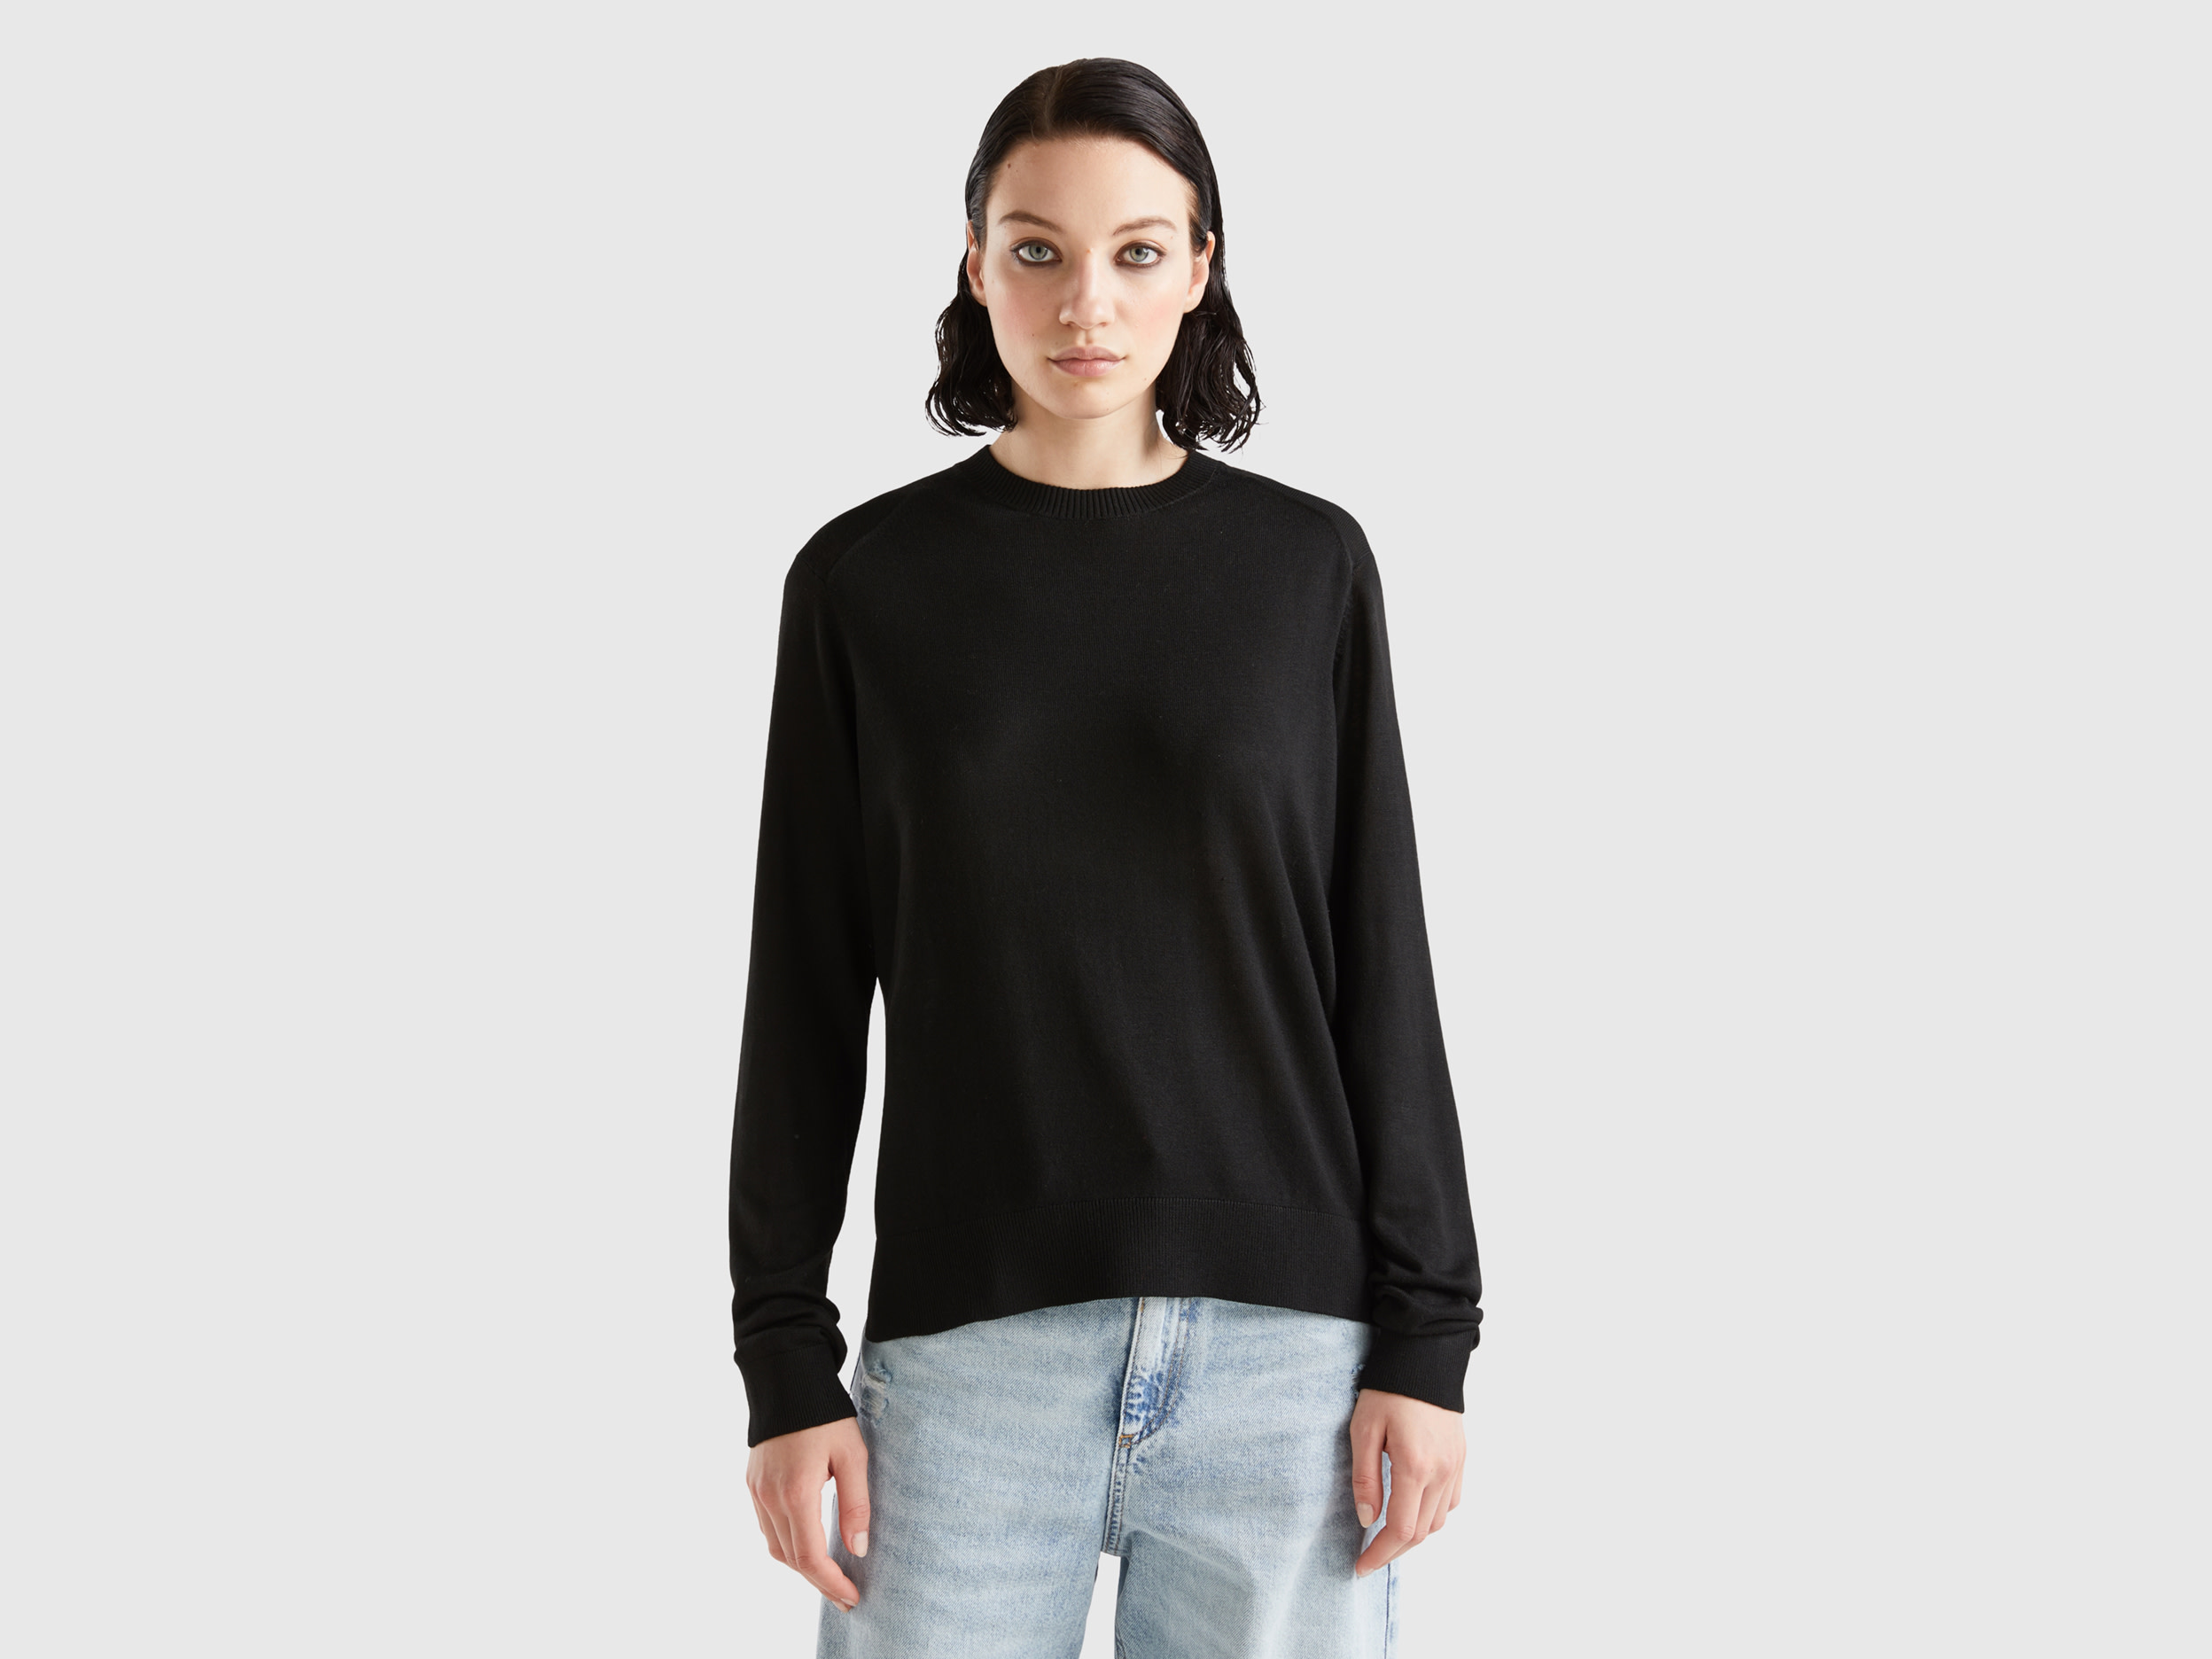 Benetton, Sweater In Viscose Blend With Slits, size M, Black, Women